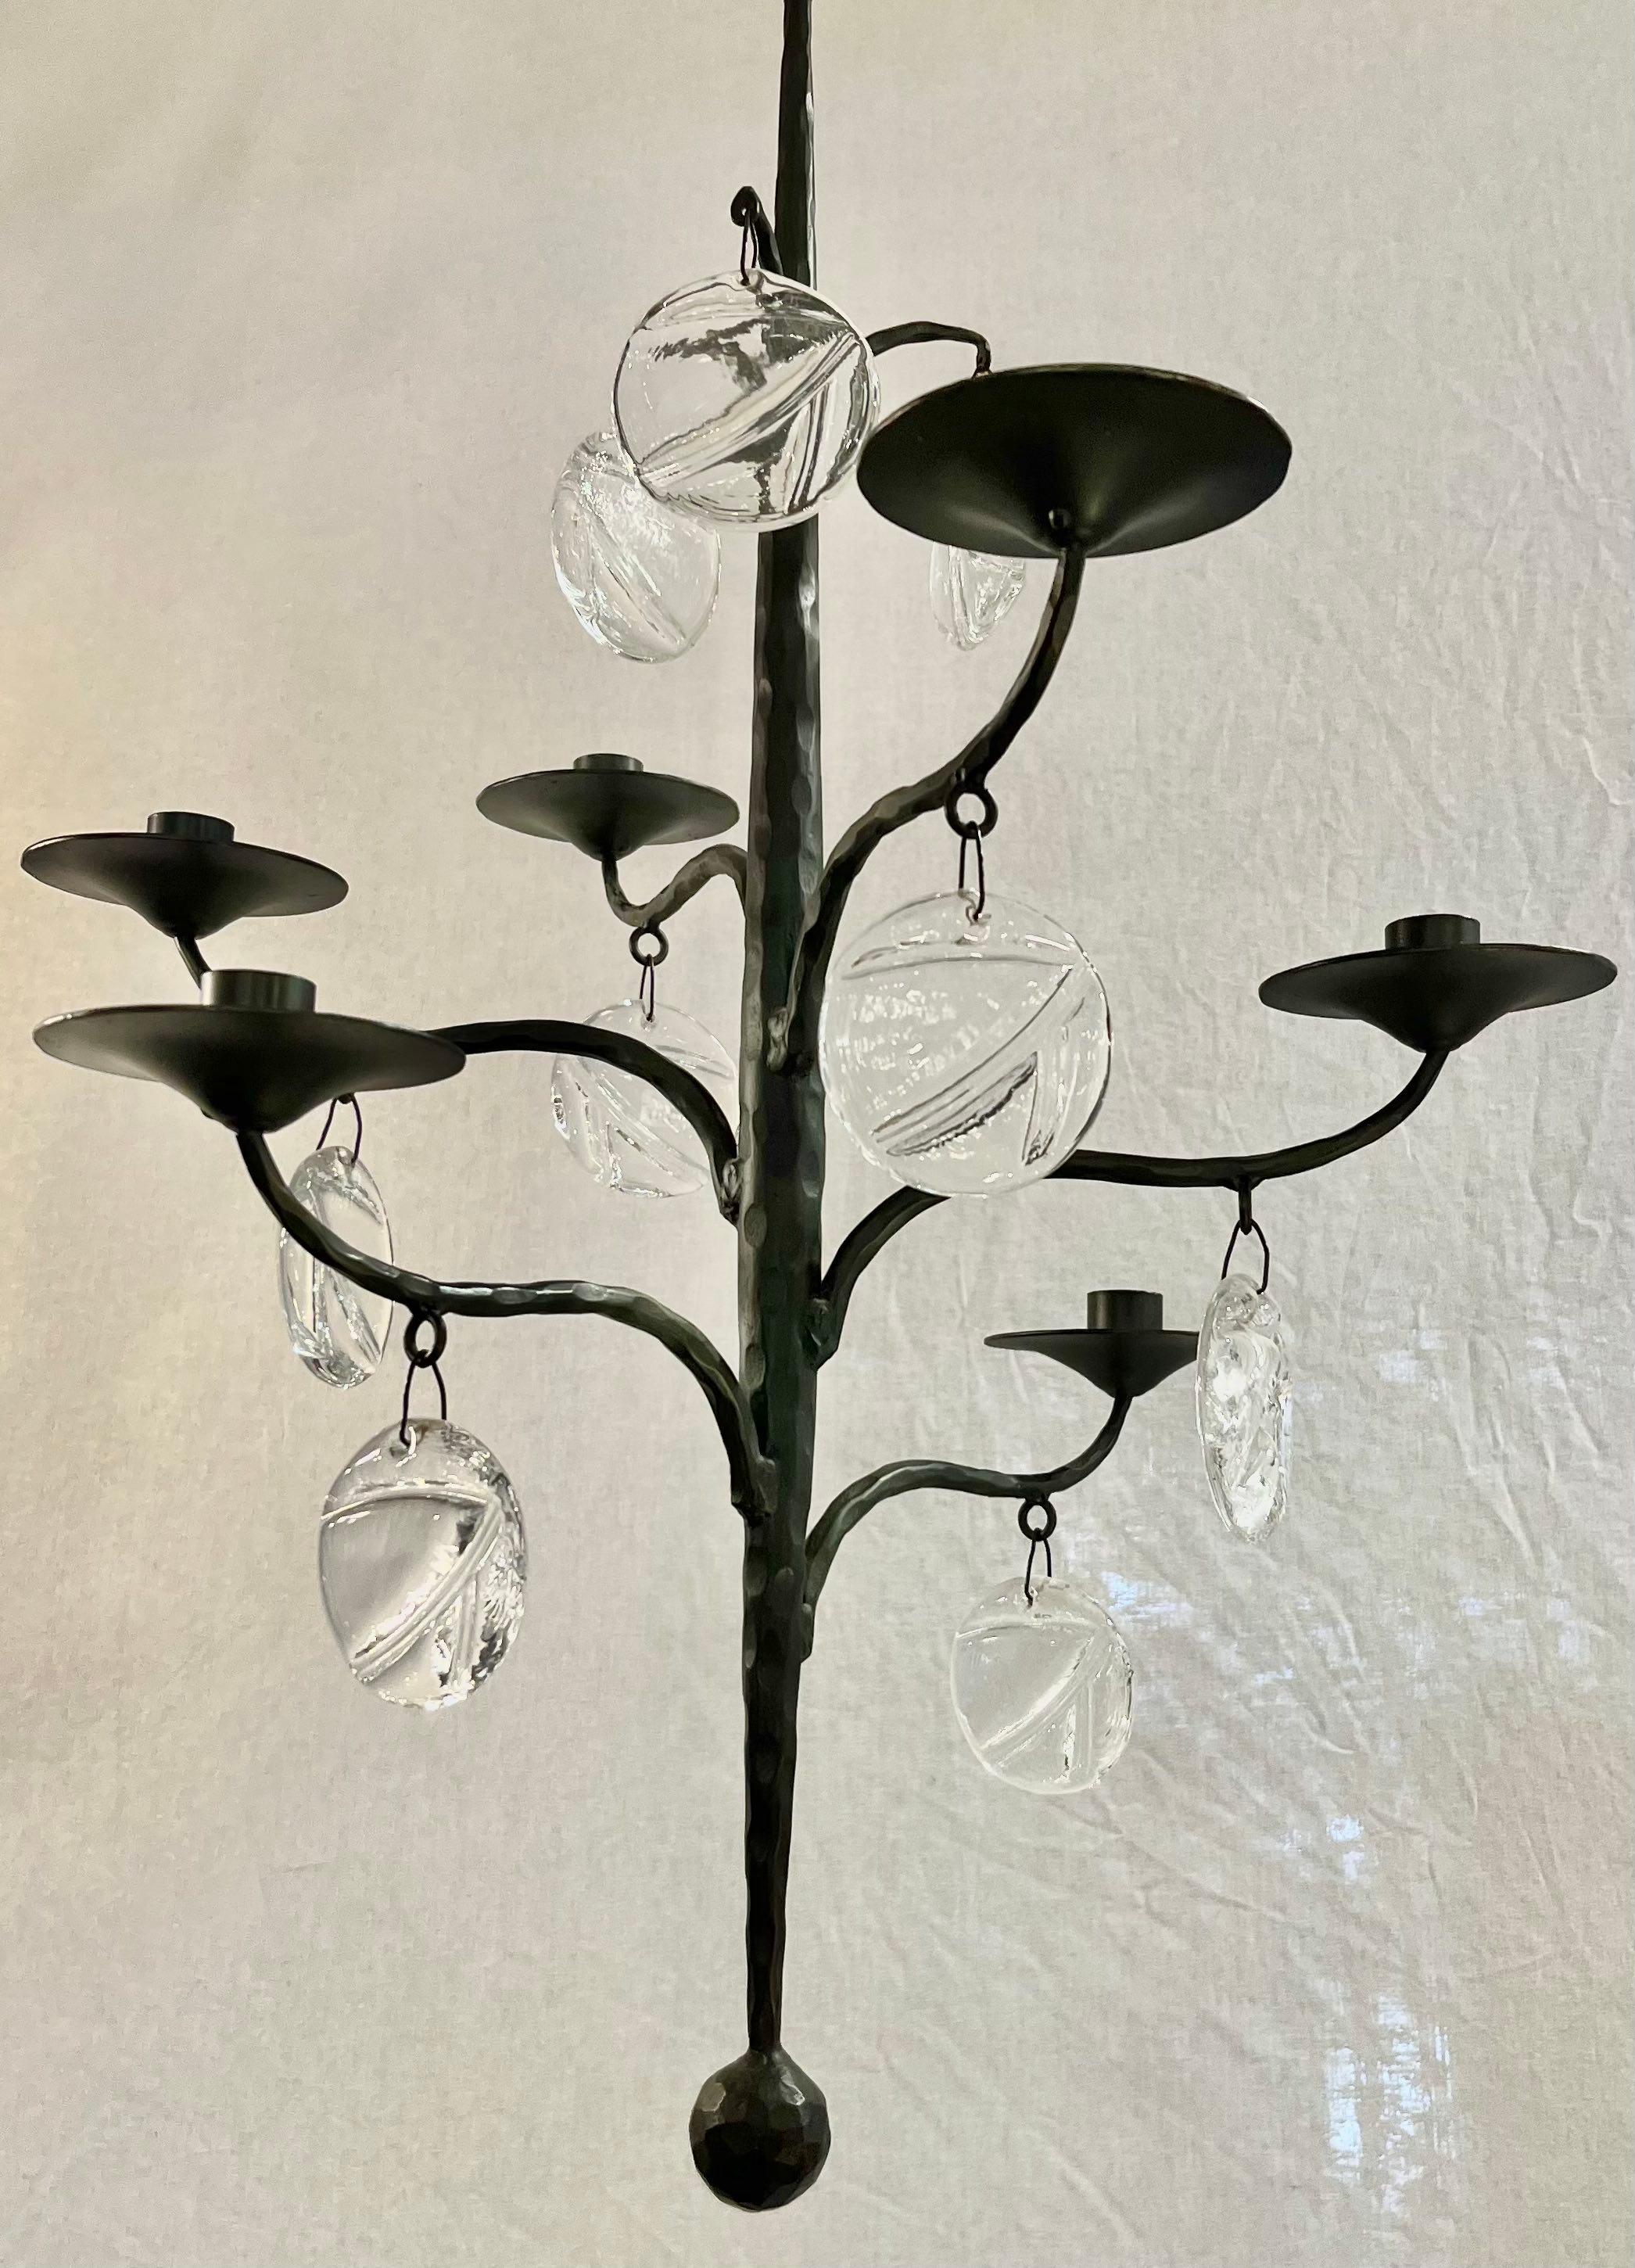 Chandelier by Erik Hoglund, Only for candles. in perfect and original condition.